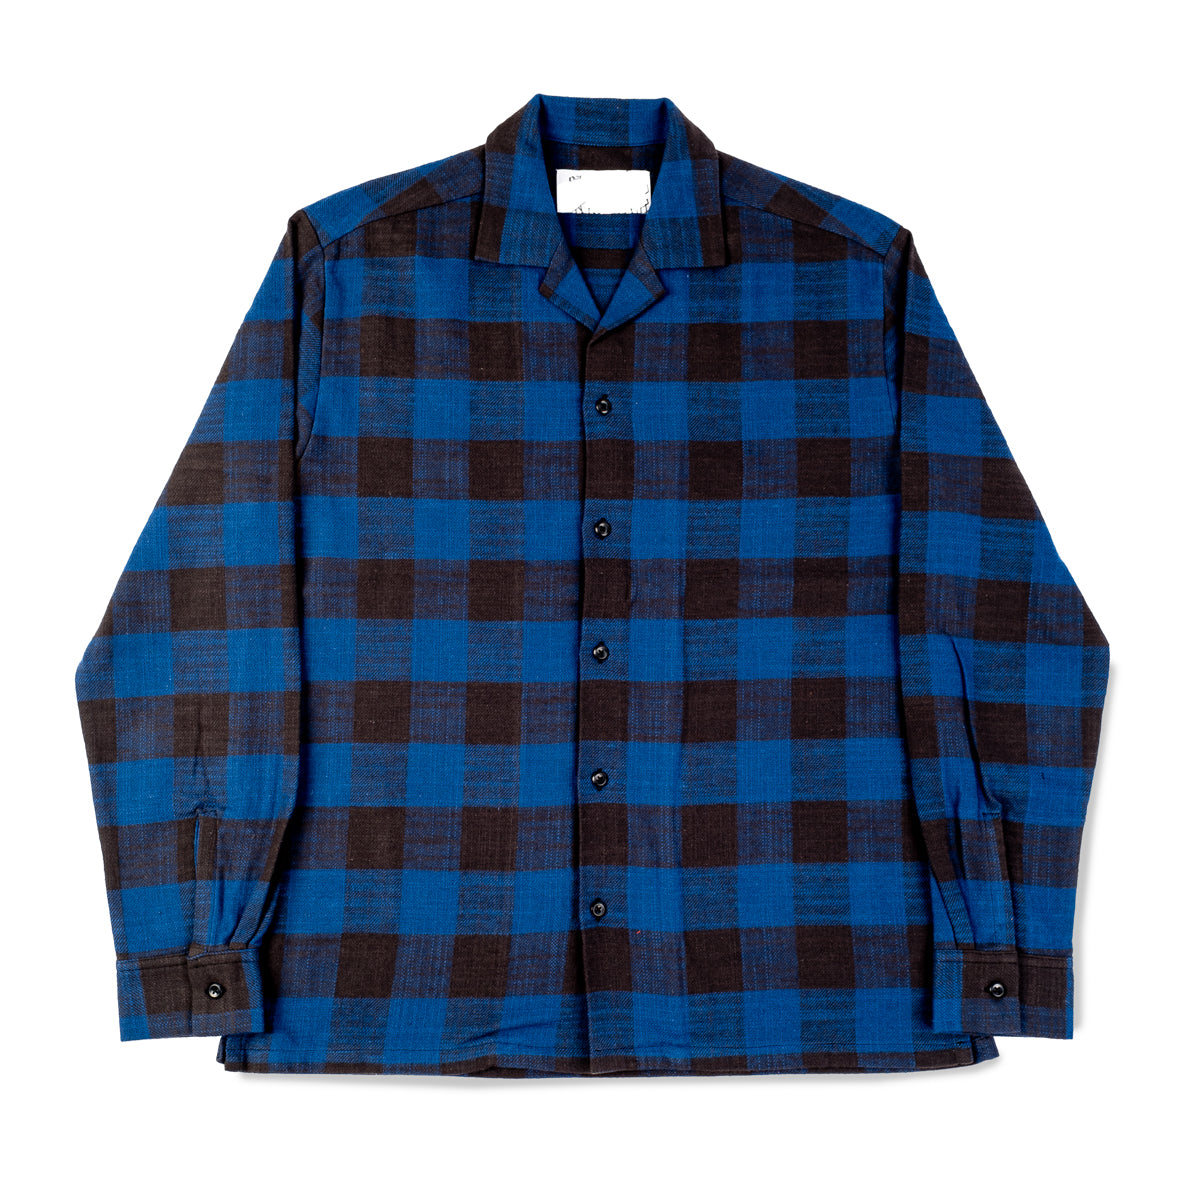 The 405 in Flannel (Long Sleeve) - Blue/Black